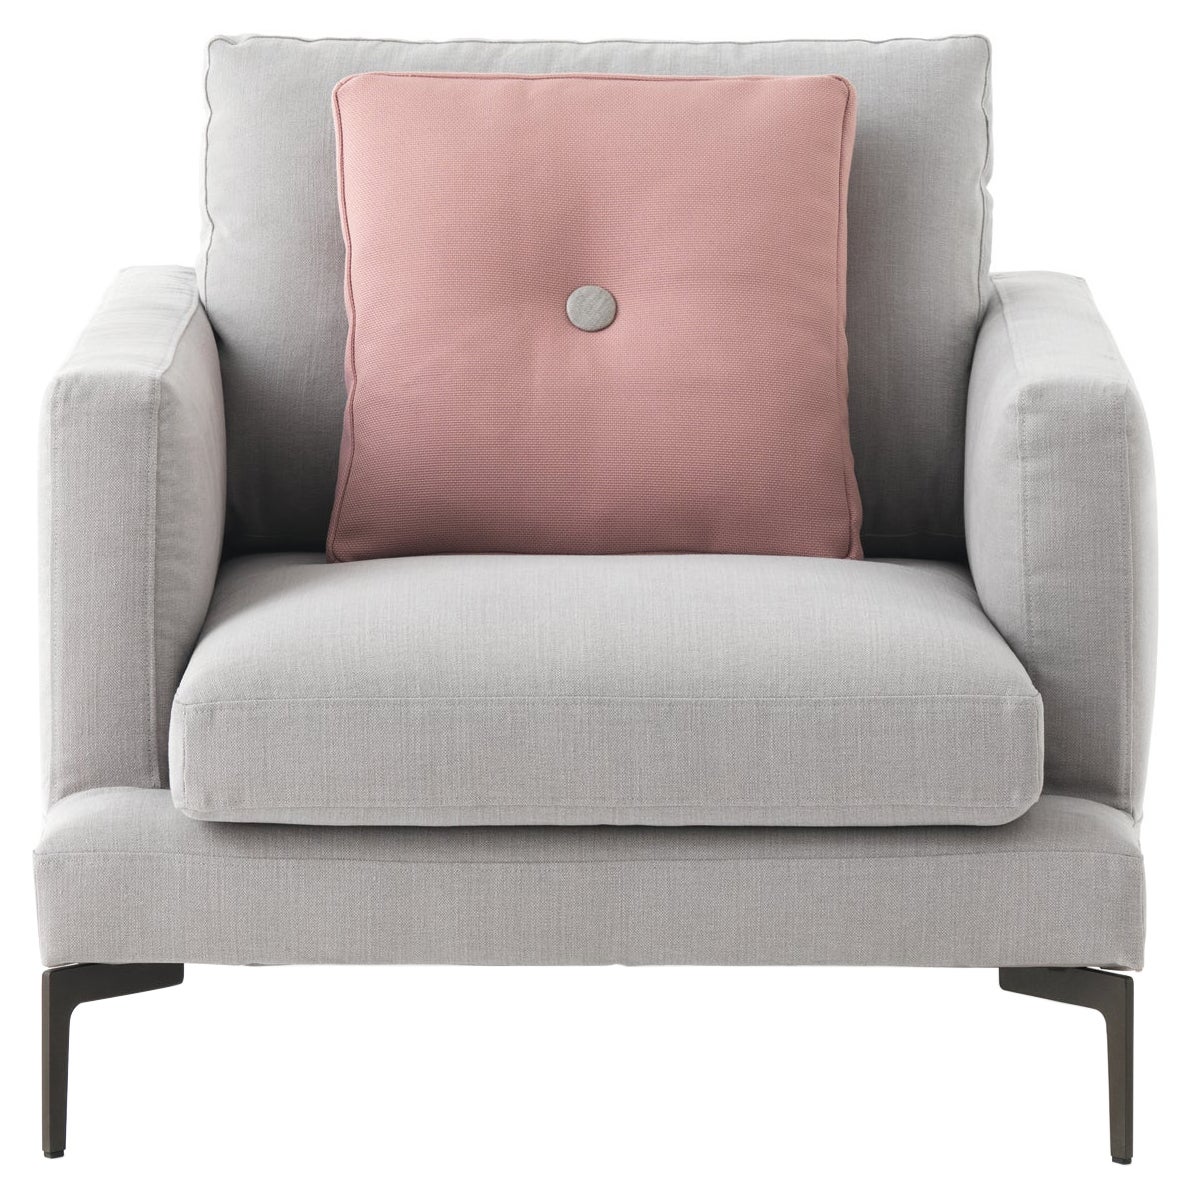 Essentiel Creta Grey Upholstery Large Armchair with Pink Cushion, Sergio Bicego For Sale